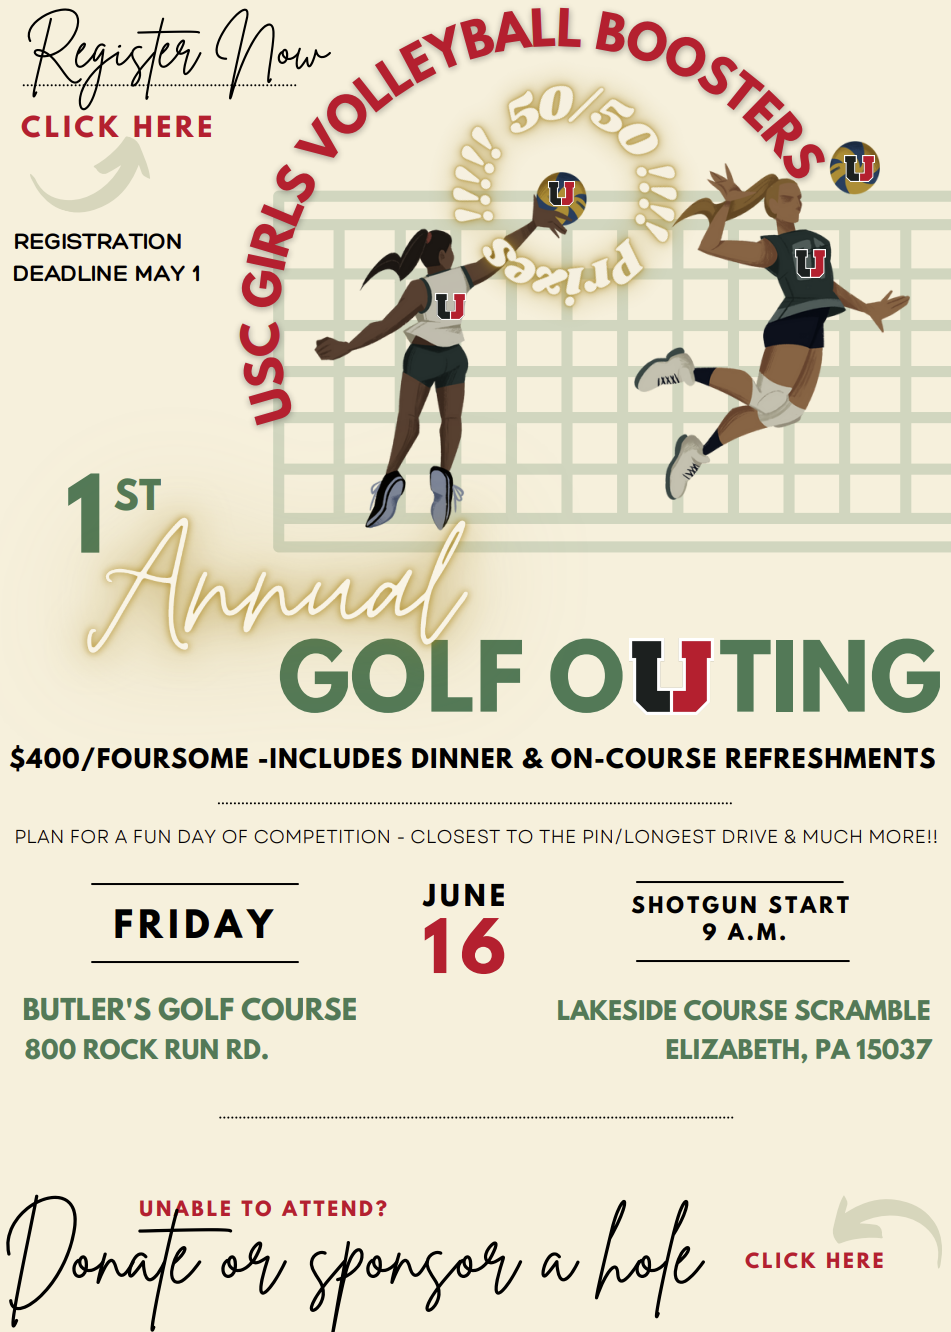 USC GIRLS VOLLEYBALL BOOSTERS - GOLF OUTING